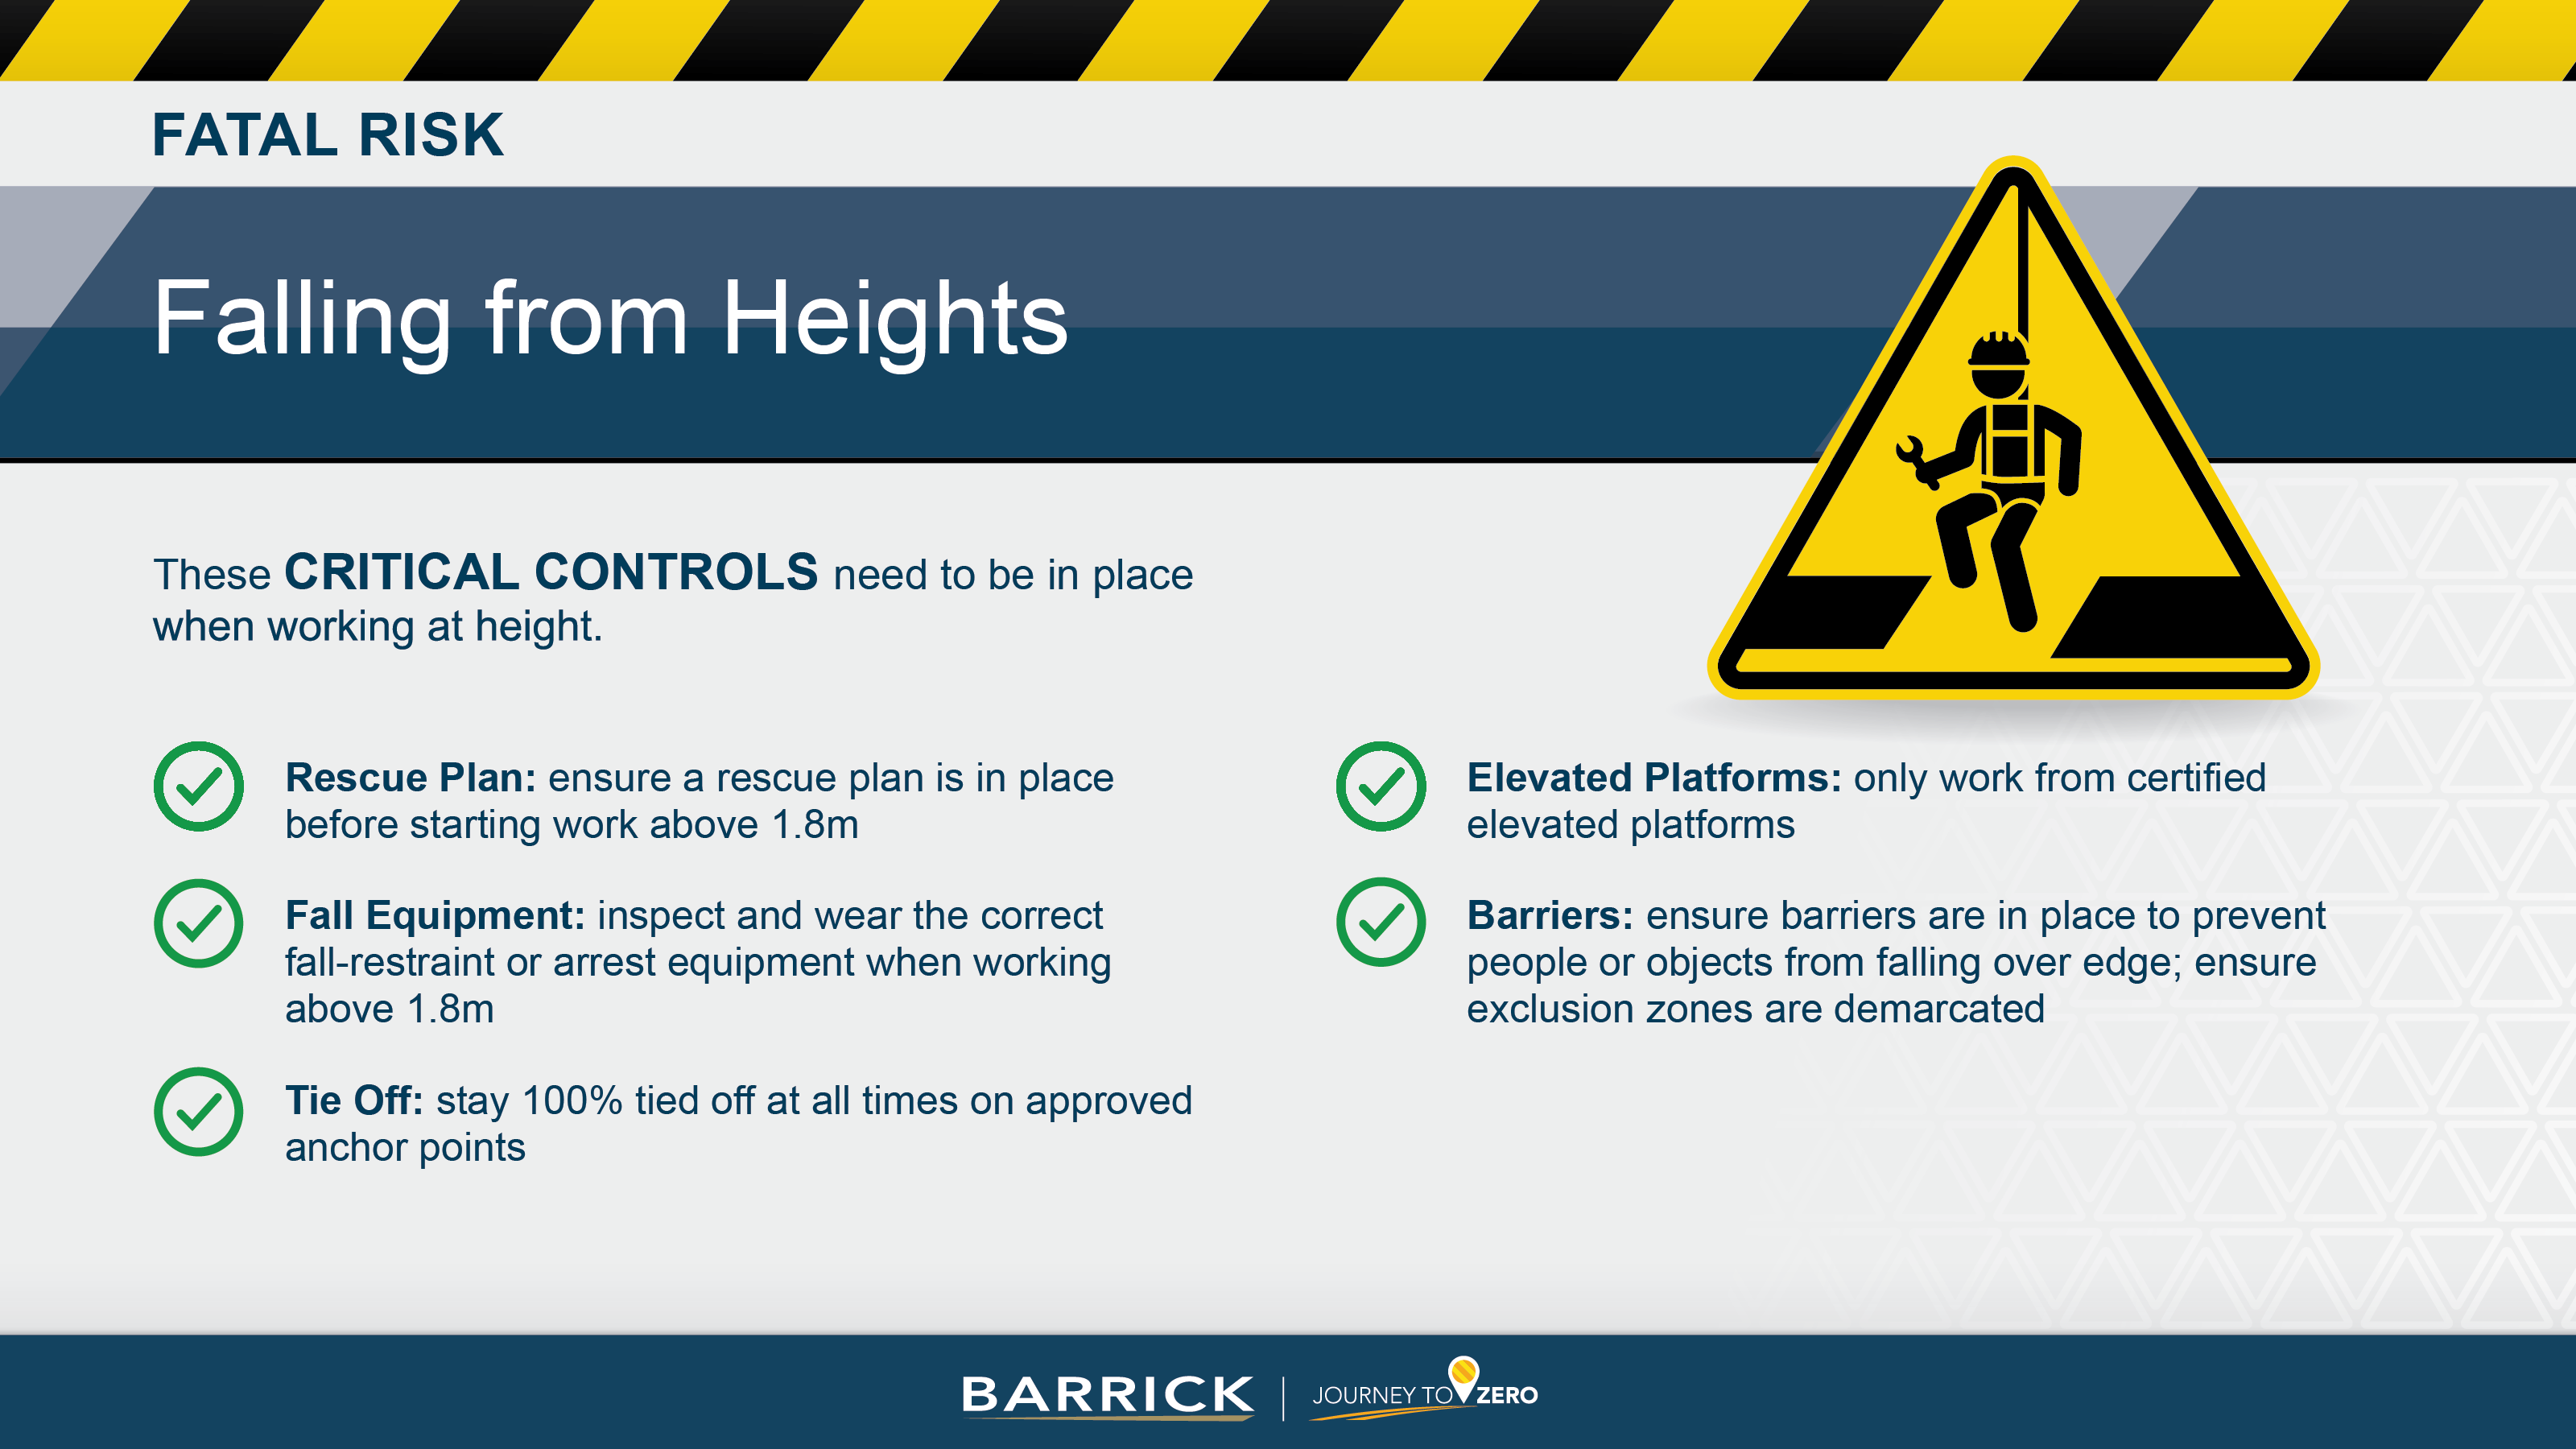 BARRICK_FRI_POSTER_ENGLISH_SCREEN__FALLING FROM HEIGHTS.png